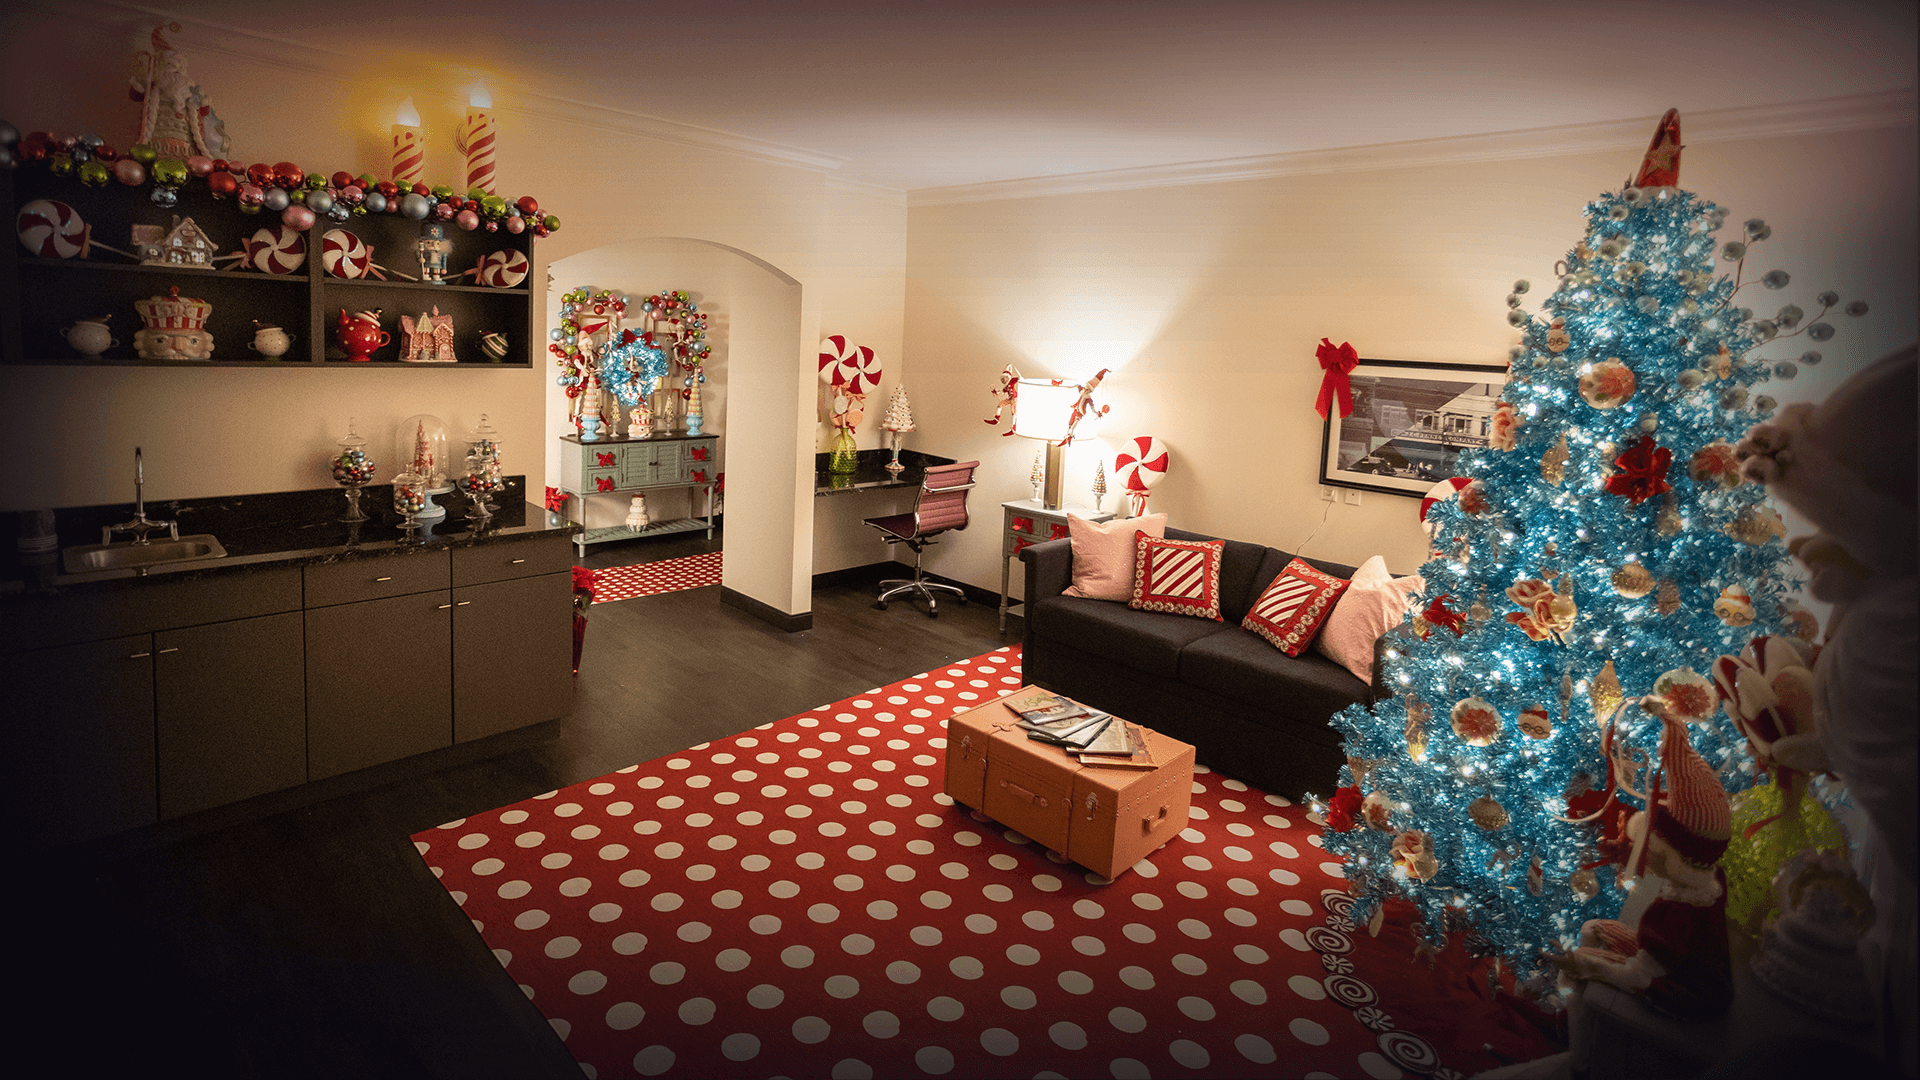 Take a peek inside the Mrs. Kringle Suite at the Hotel Indigo Cleveland Downtown.